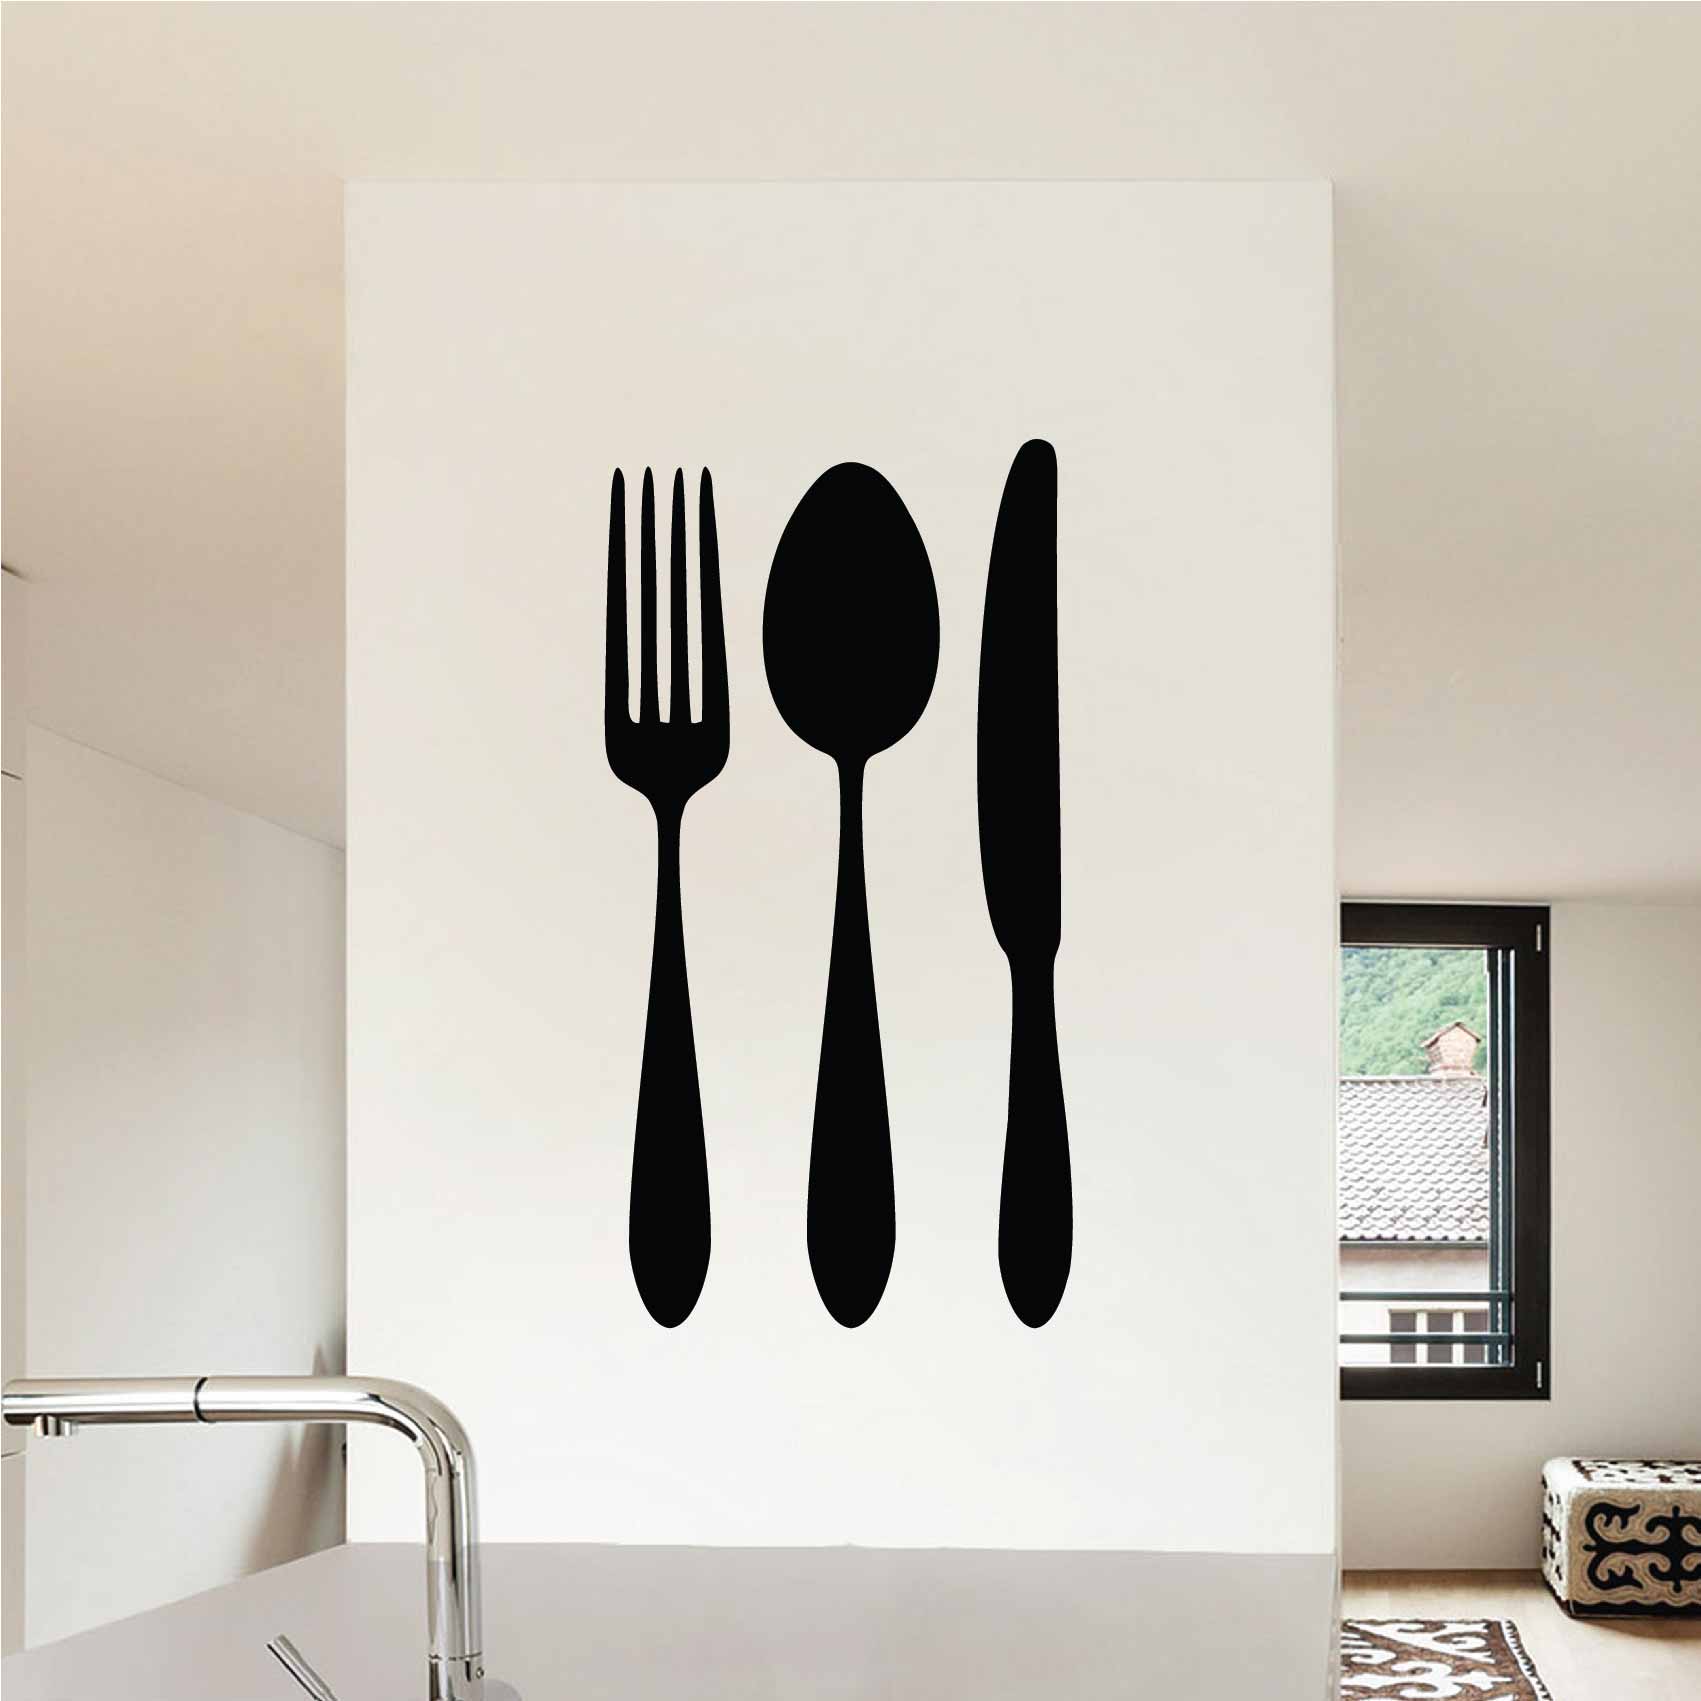 stickers-muraux-couverts-ref68cuisine-stickers-muraux-cuisine-autocollant-deco-cuisine-chambre-salon-sticker-mural-decoration